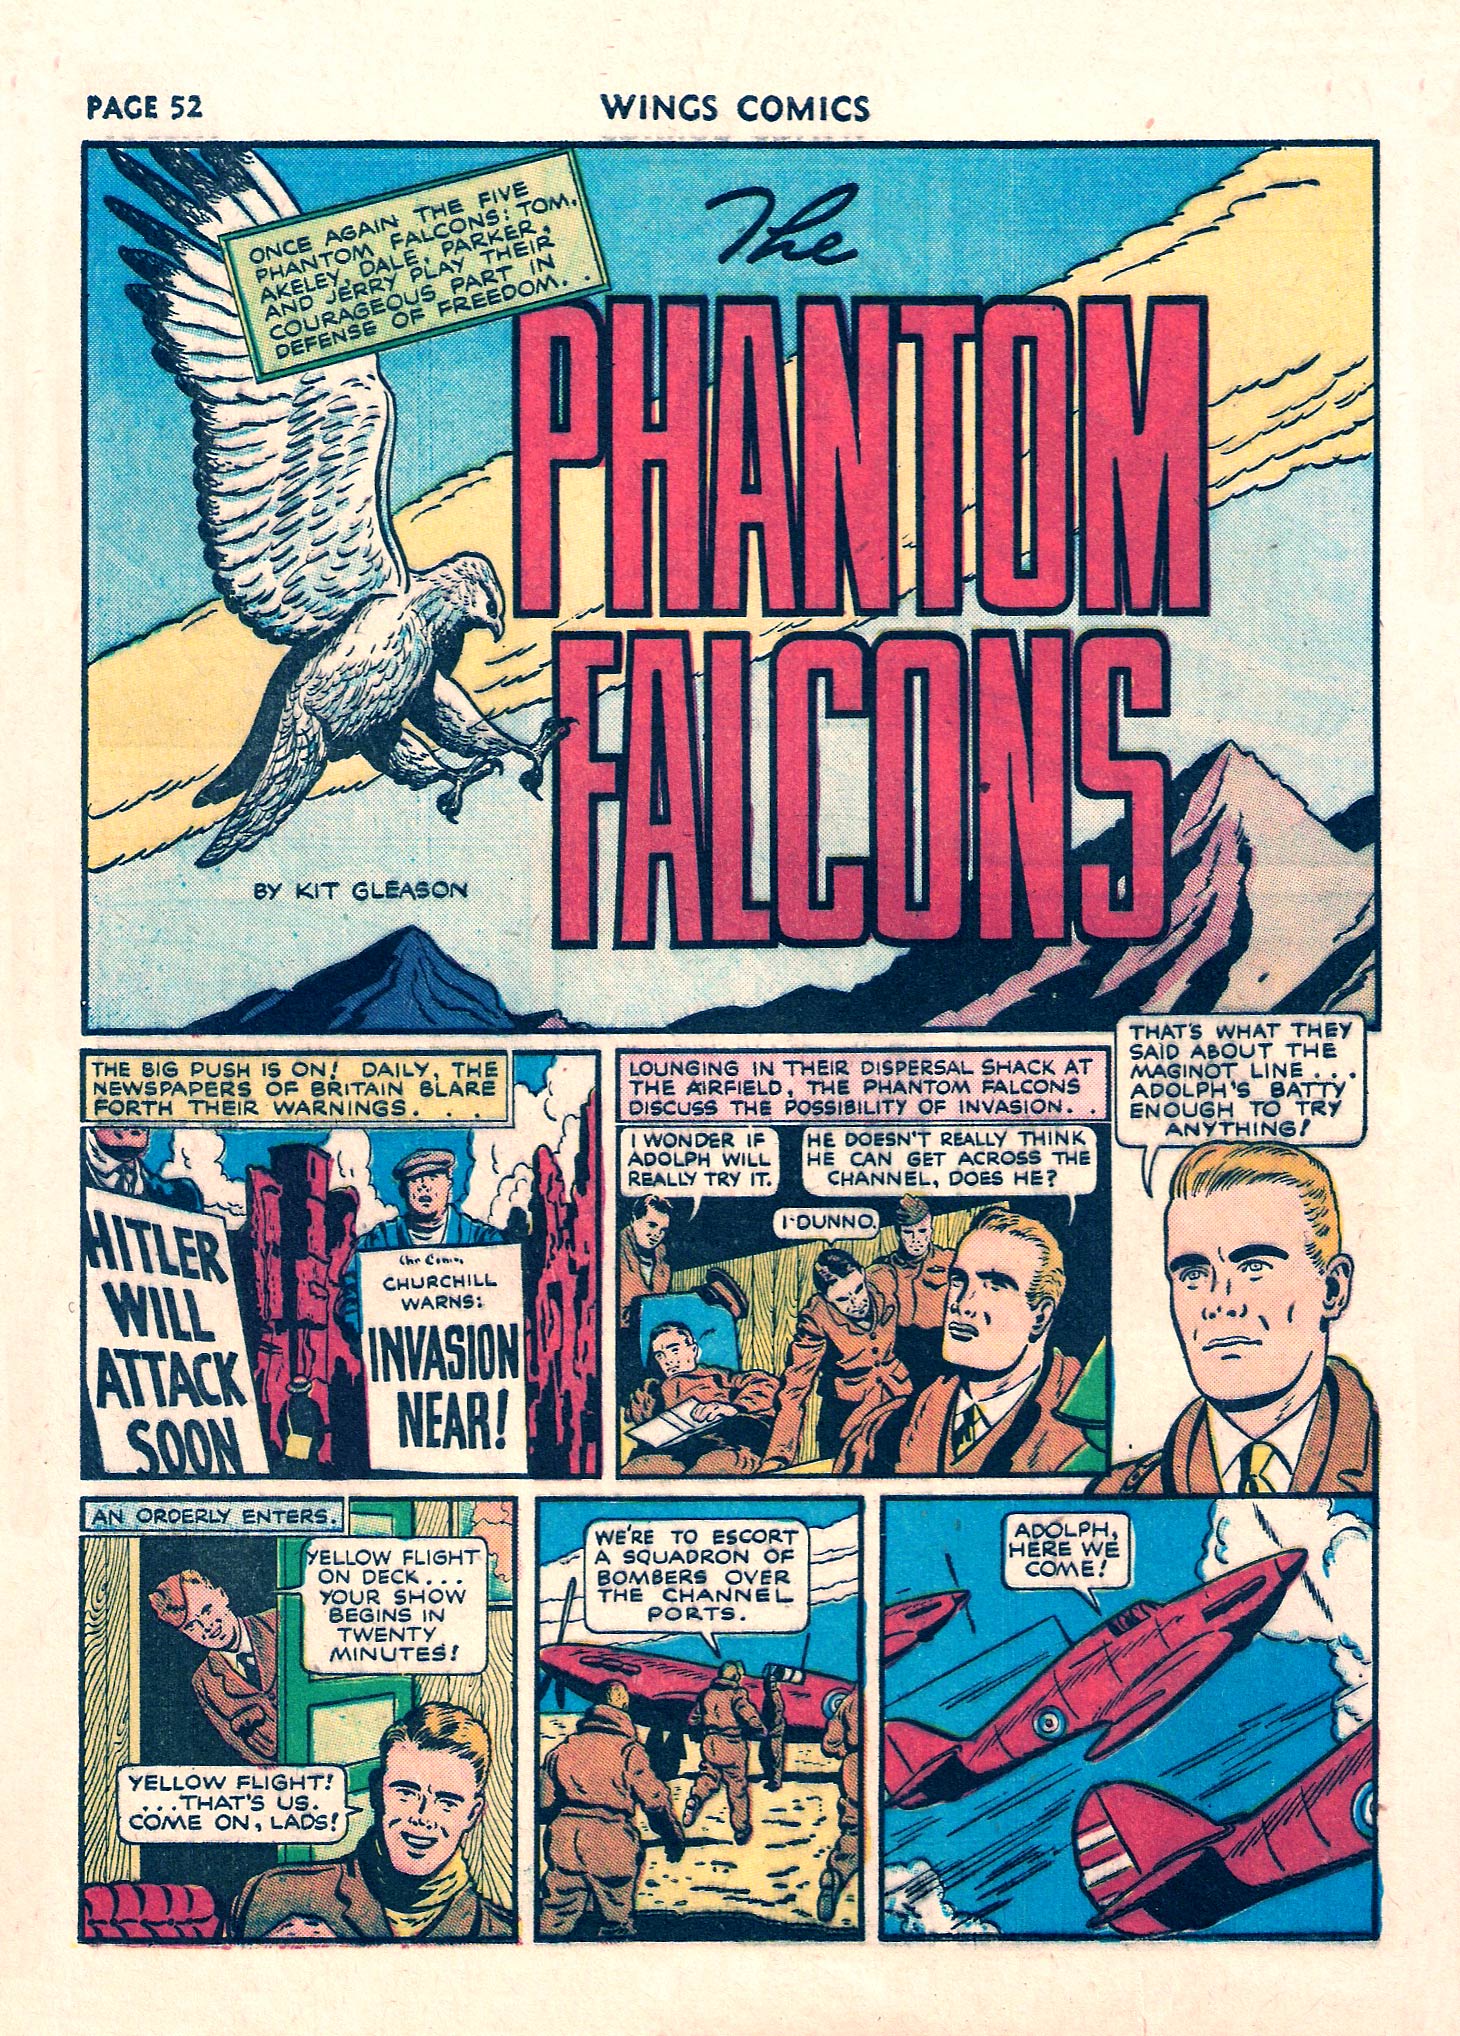 Read online Wings Comics comic -  Issue #9 - 54